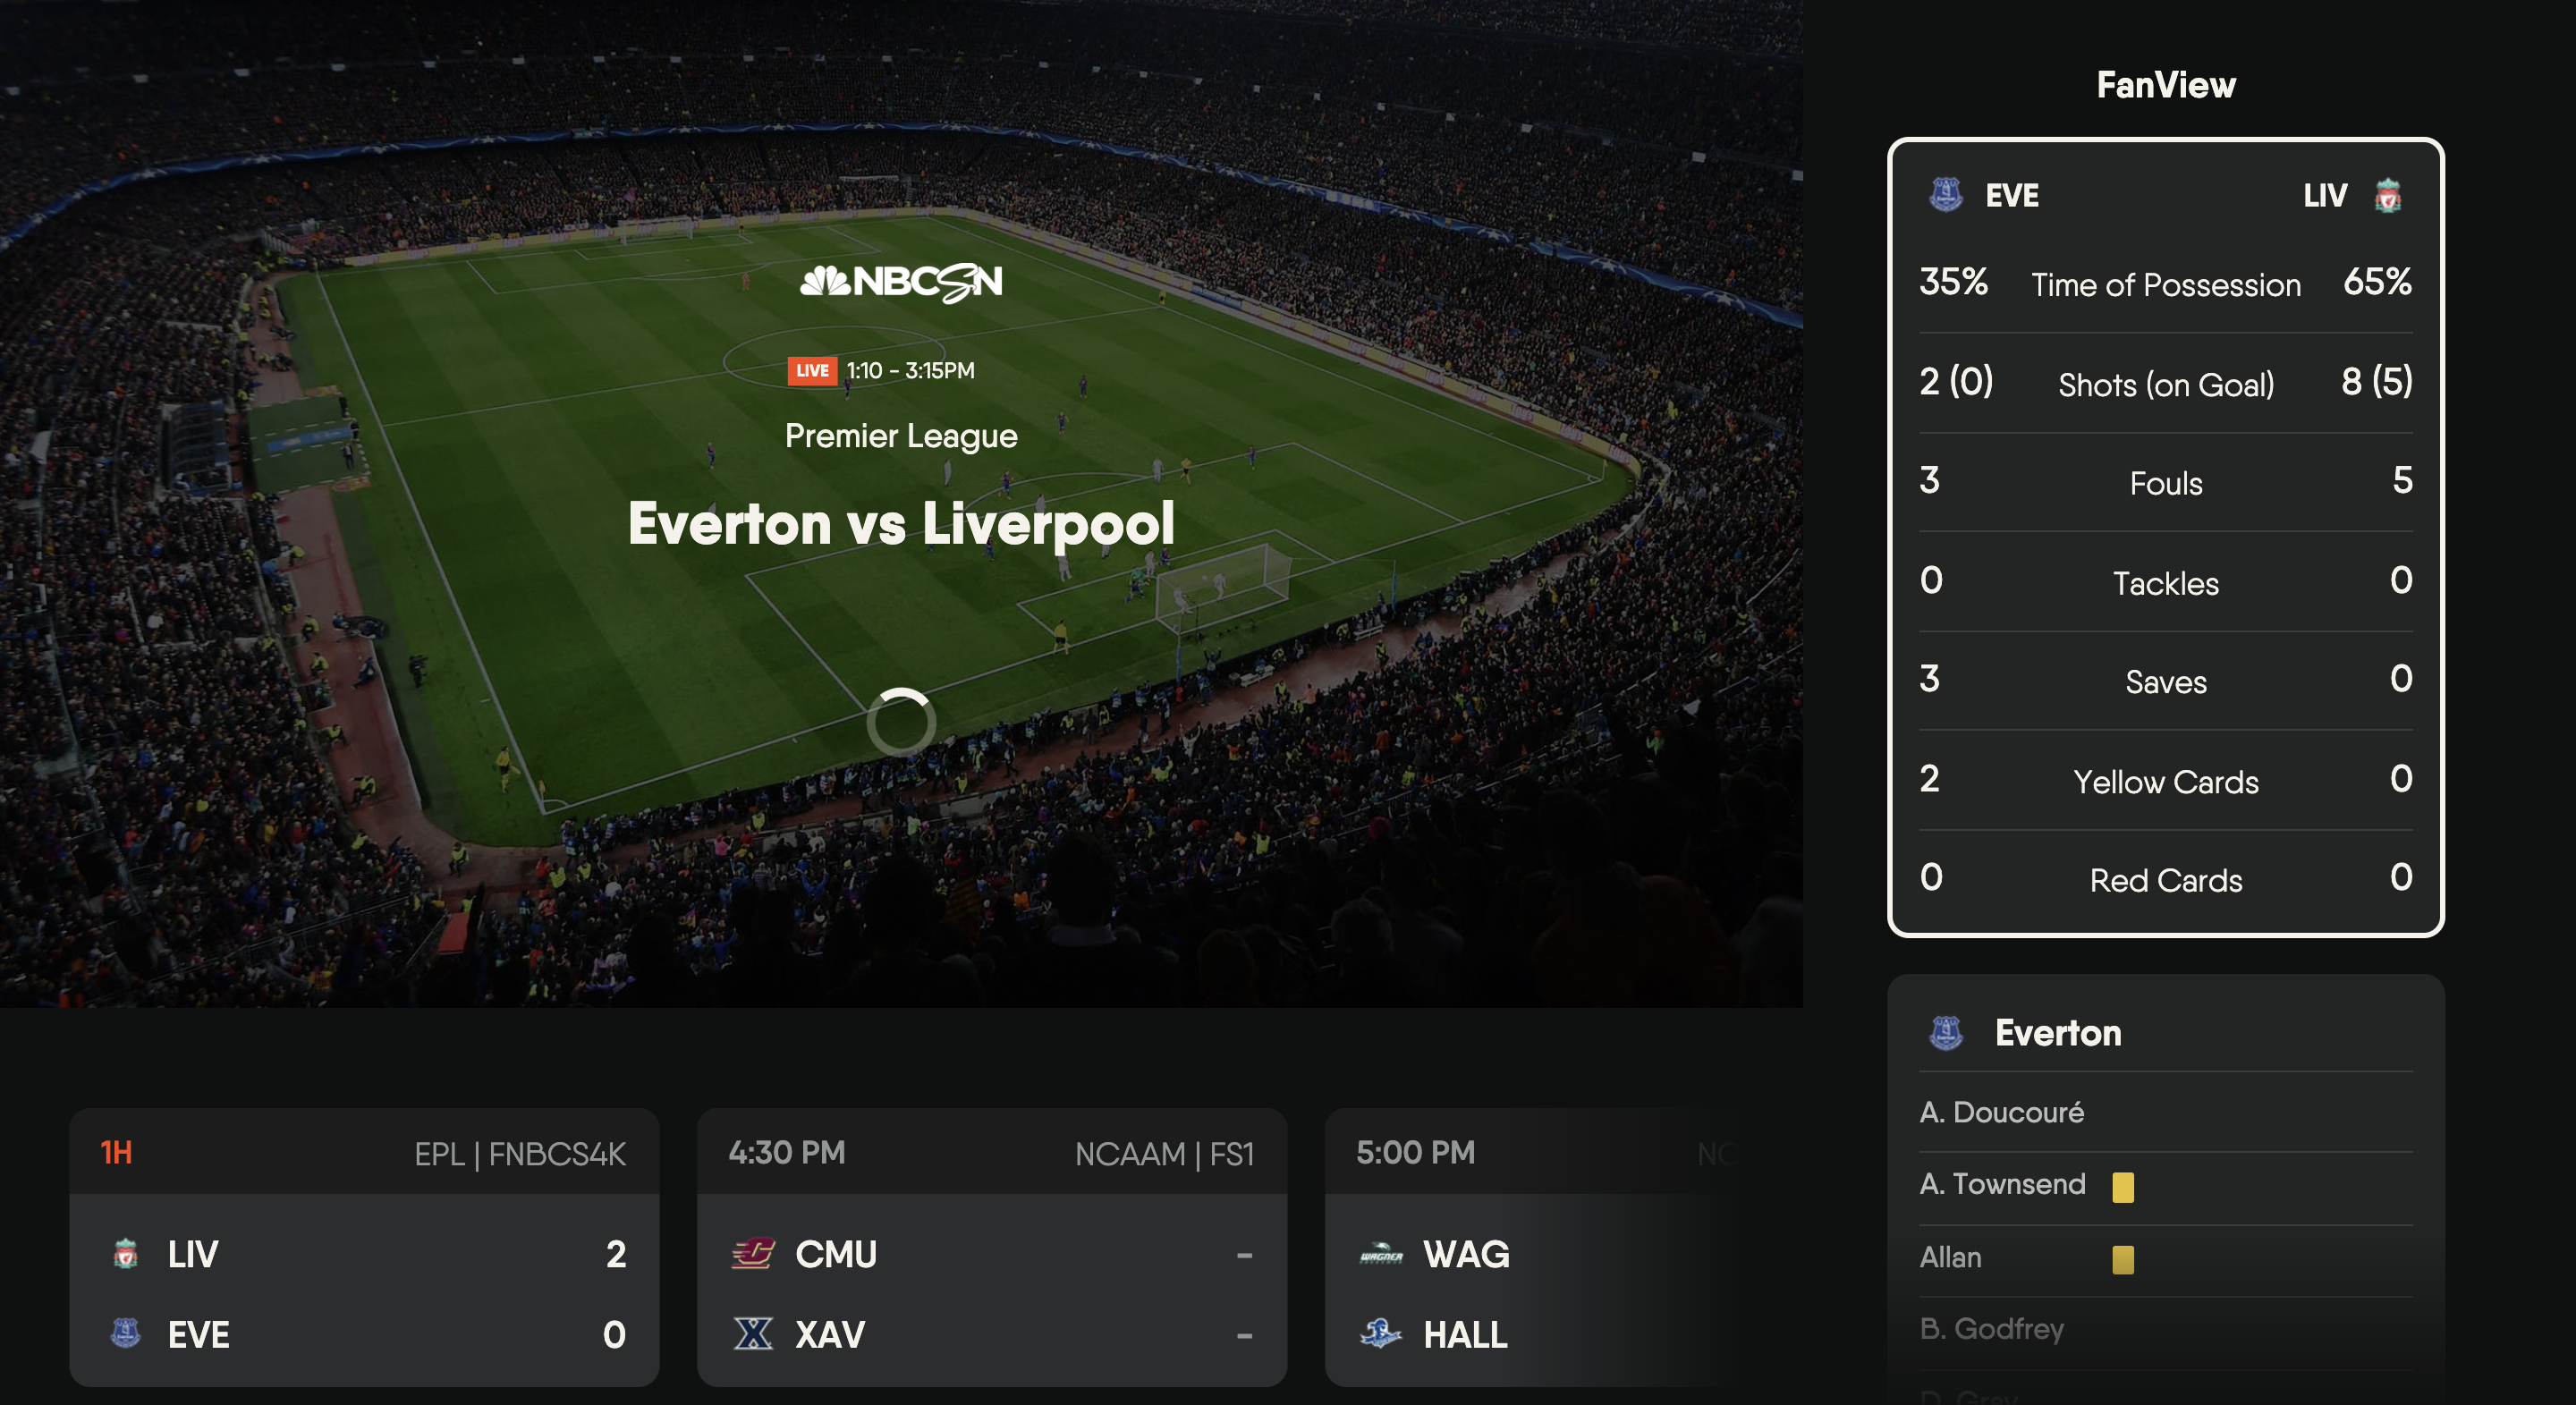 FanView on the FuboTV app for Samsung with game stats highlighted at right